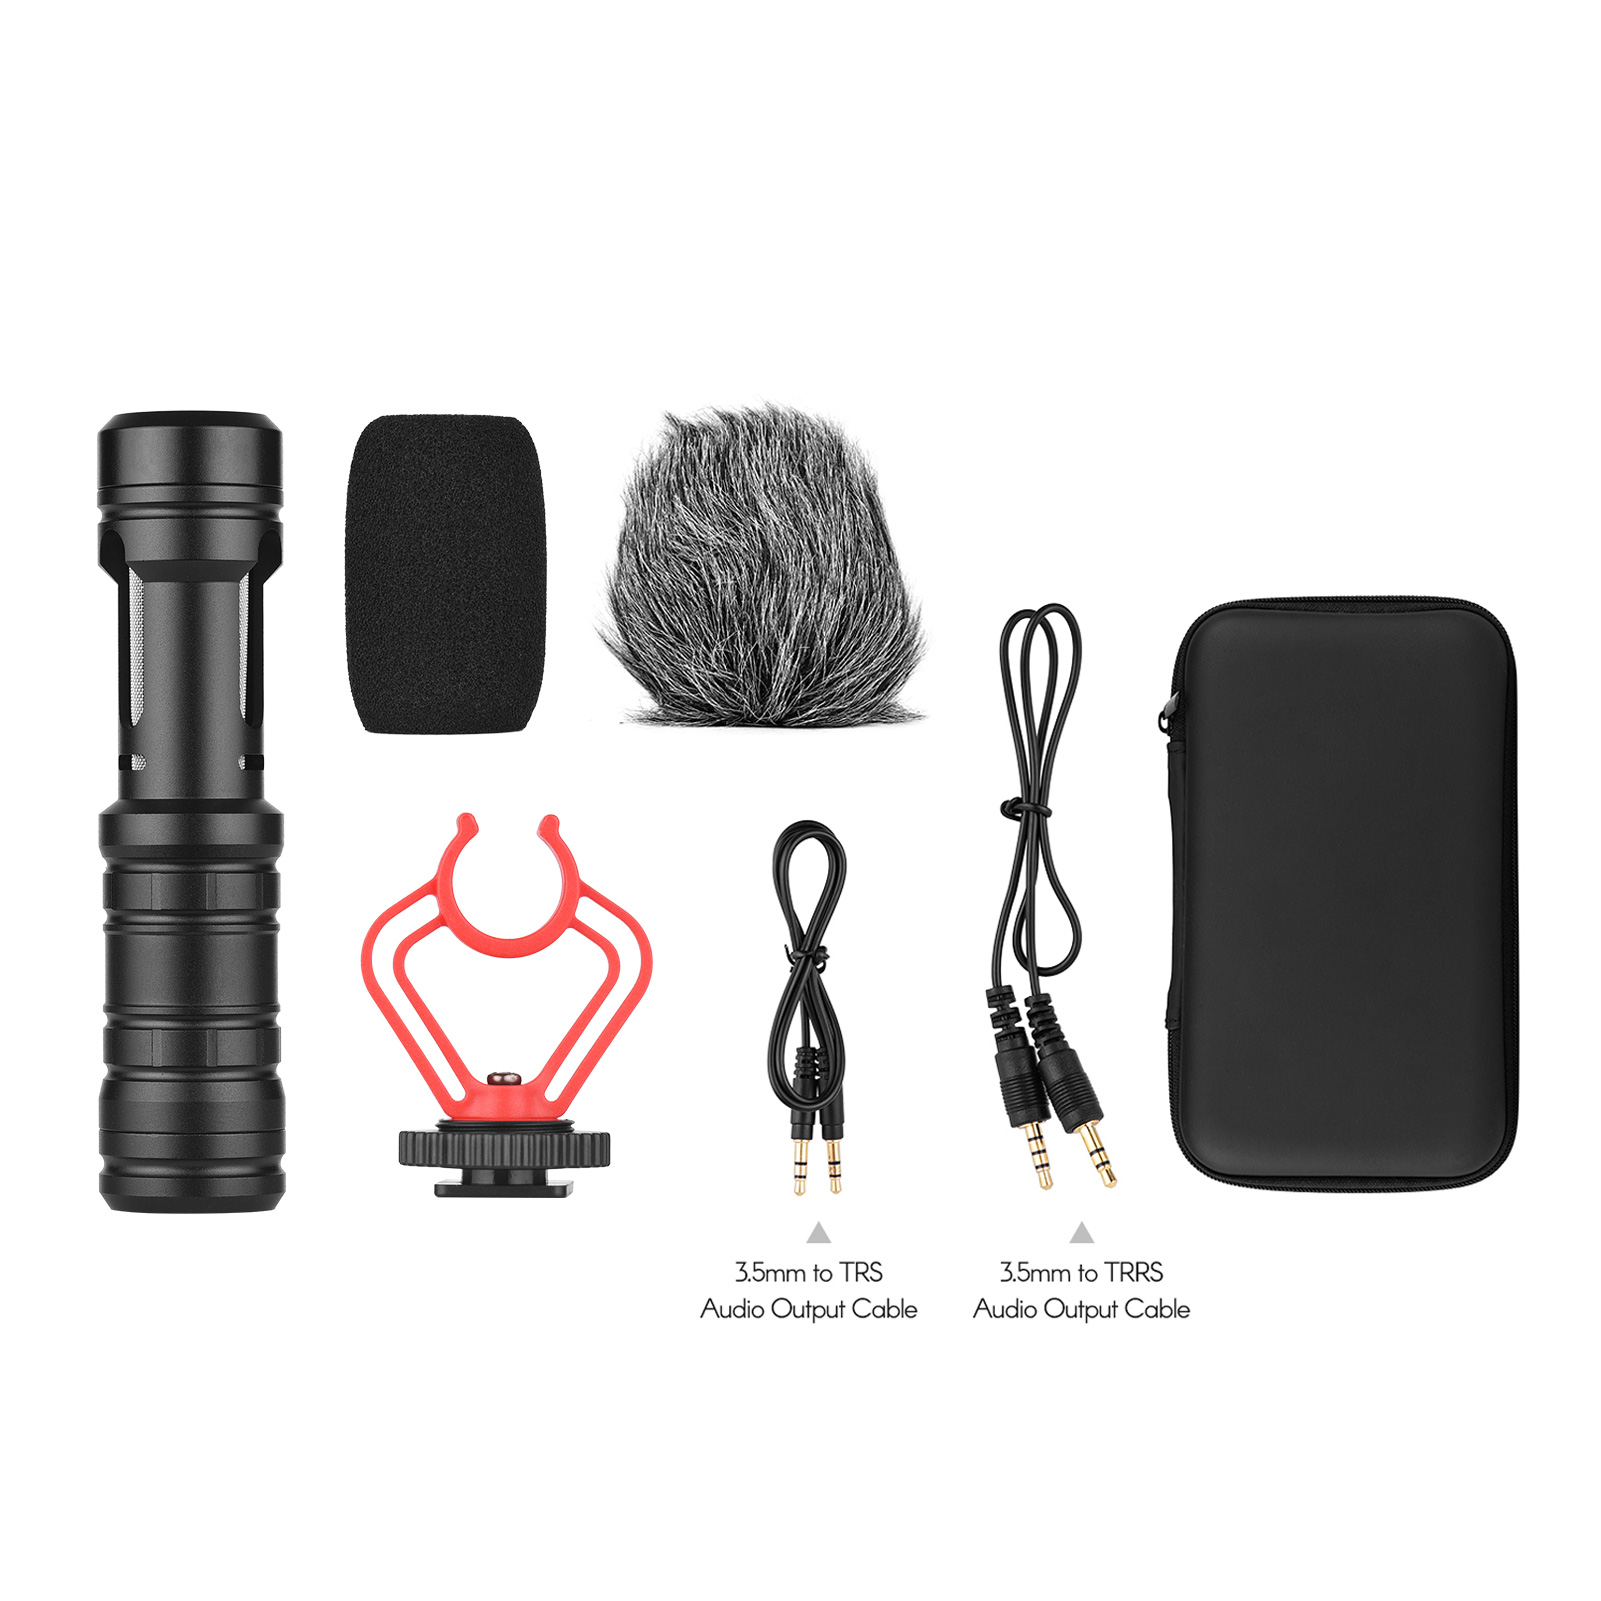 Andoer Microphone Cardioid Condenser Mic with 3.5mm Port - Mount Sponge & Furry Windshield Carrying Case Compatible with Phones for Video Recording Interview - image 2 of 7